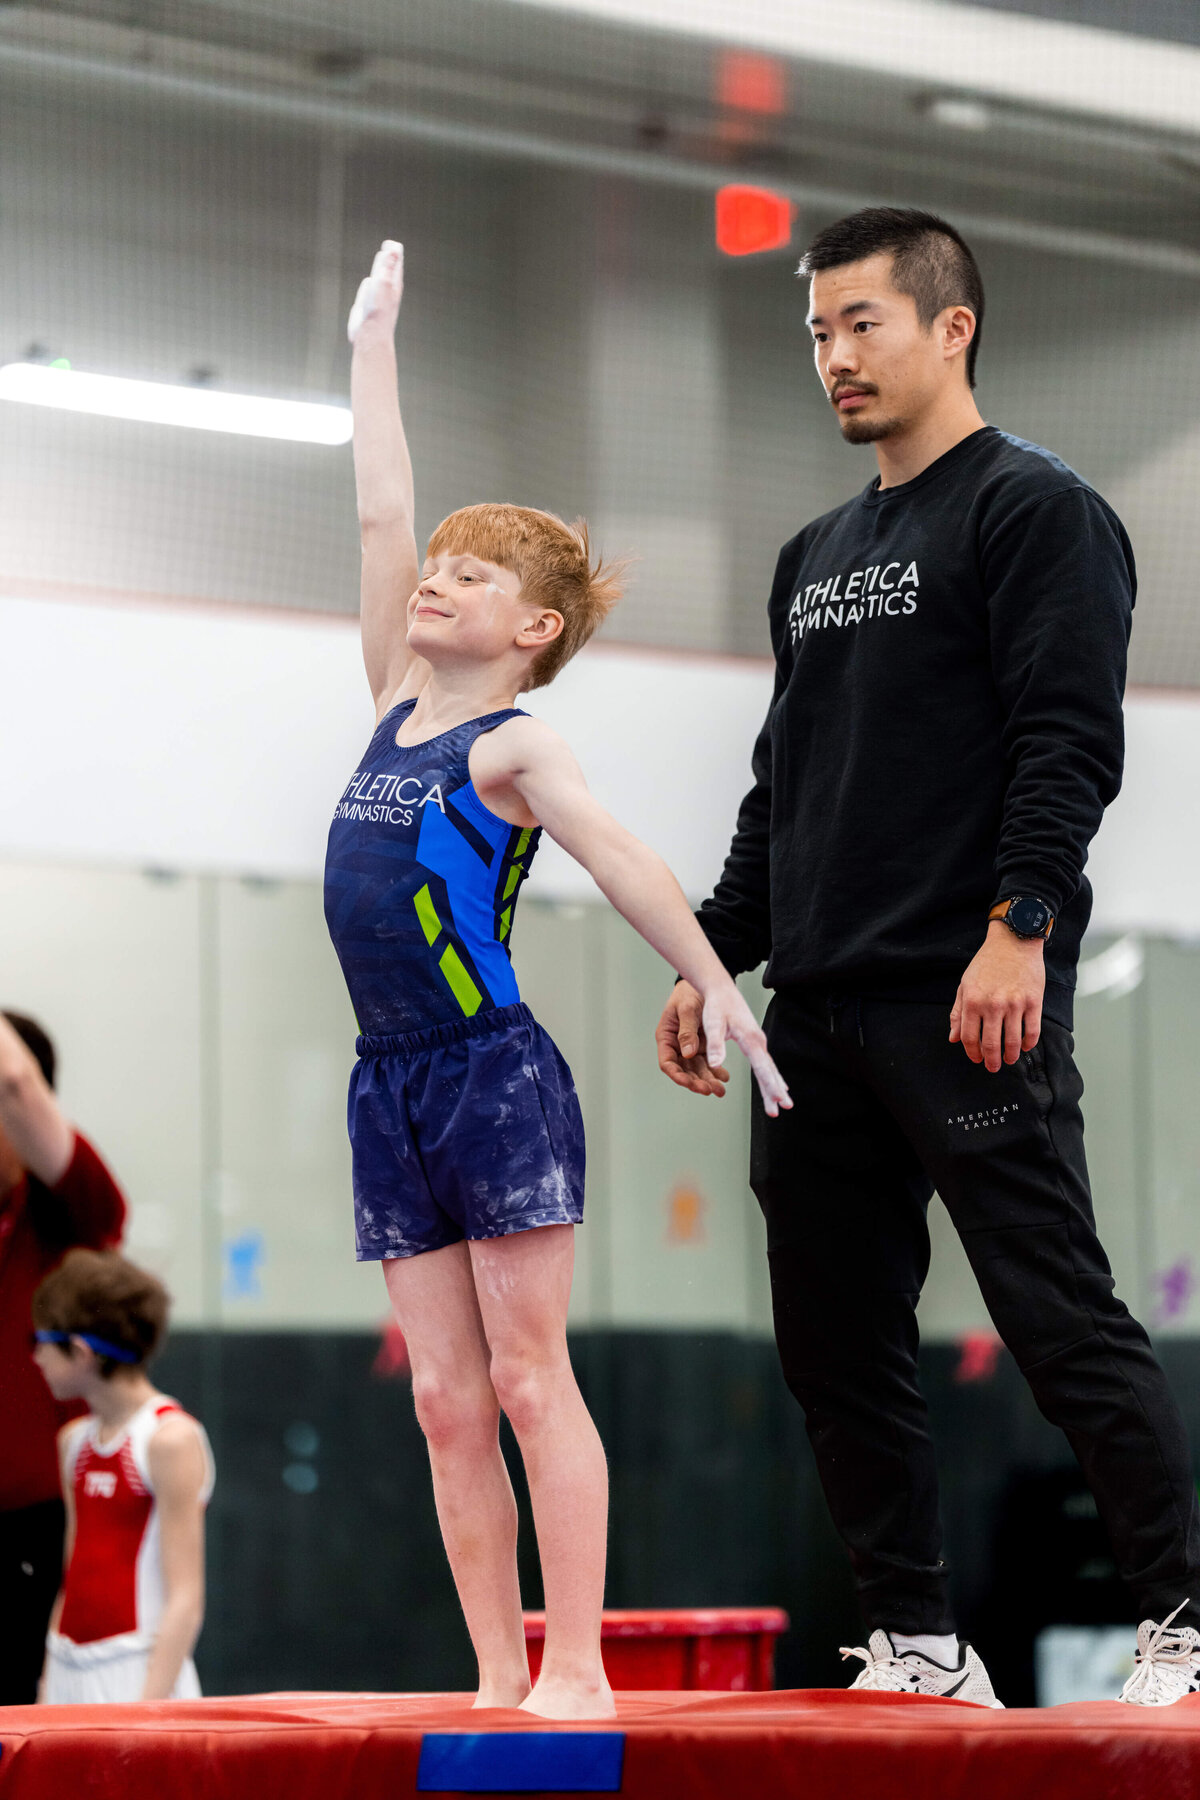 Photo by Luke O'Geil taken at the 2023 inaugural Grizzly Classic men's artistic gymnastics competitionA1_07996